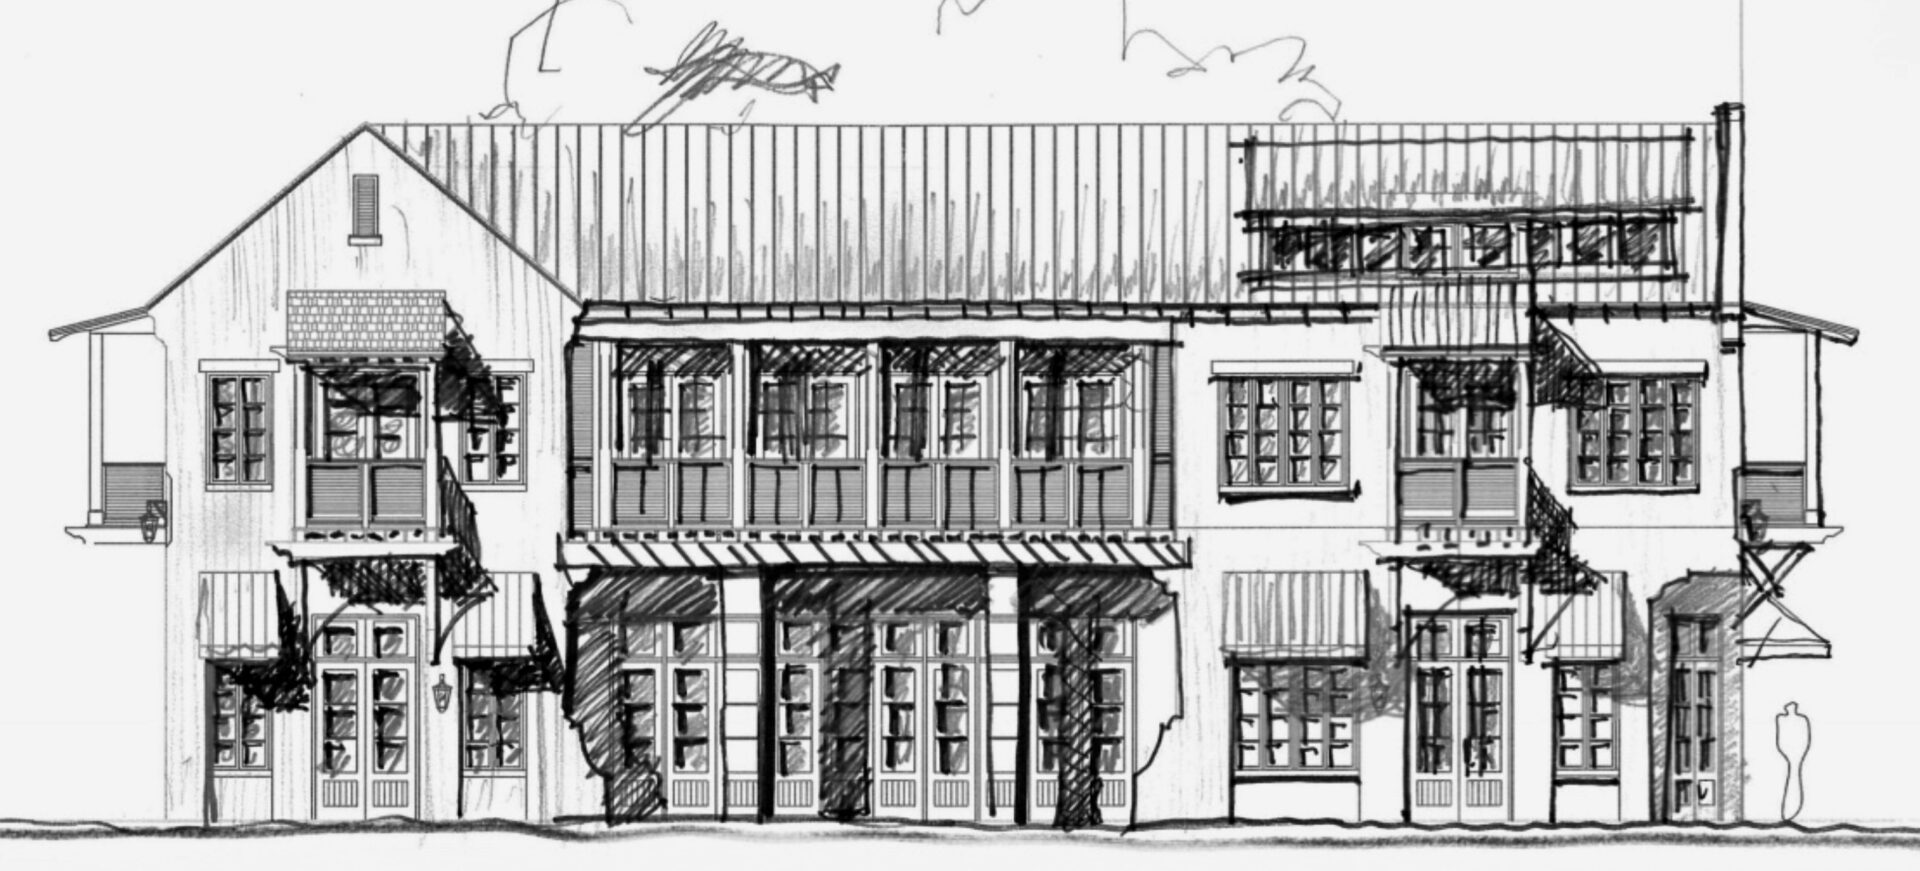 A black and white sketch of the restaurant